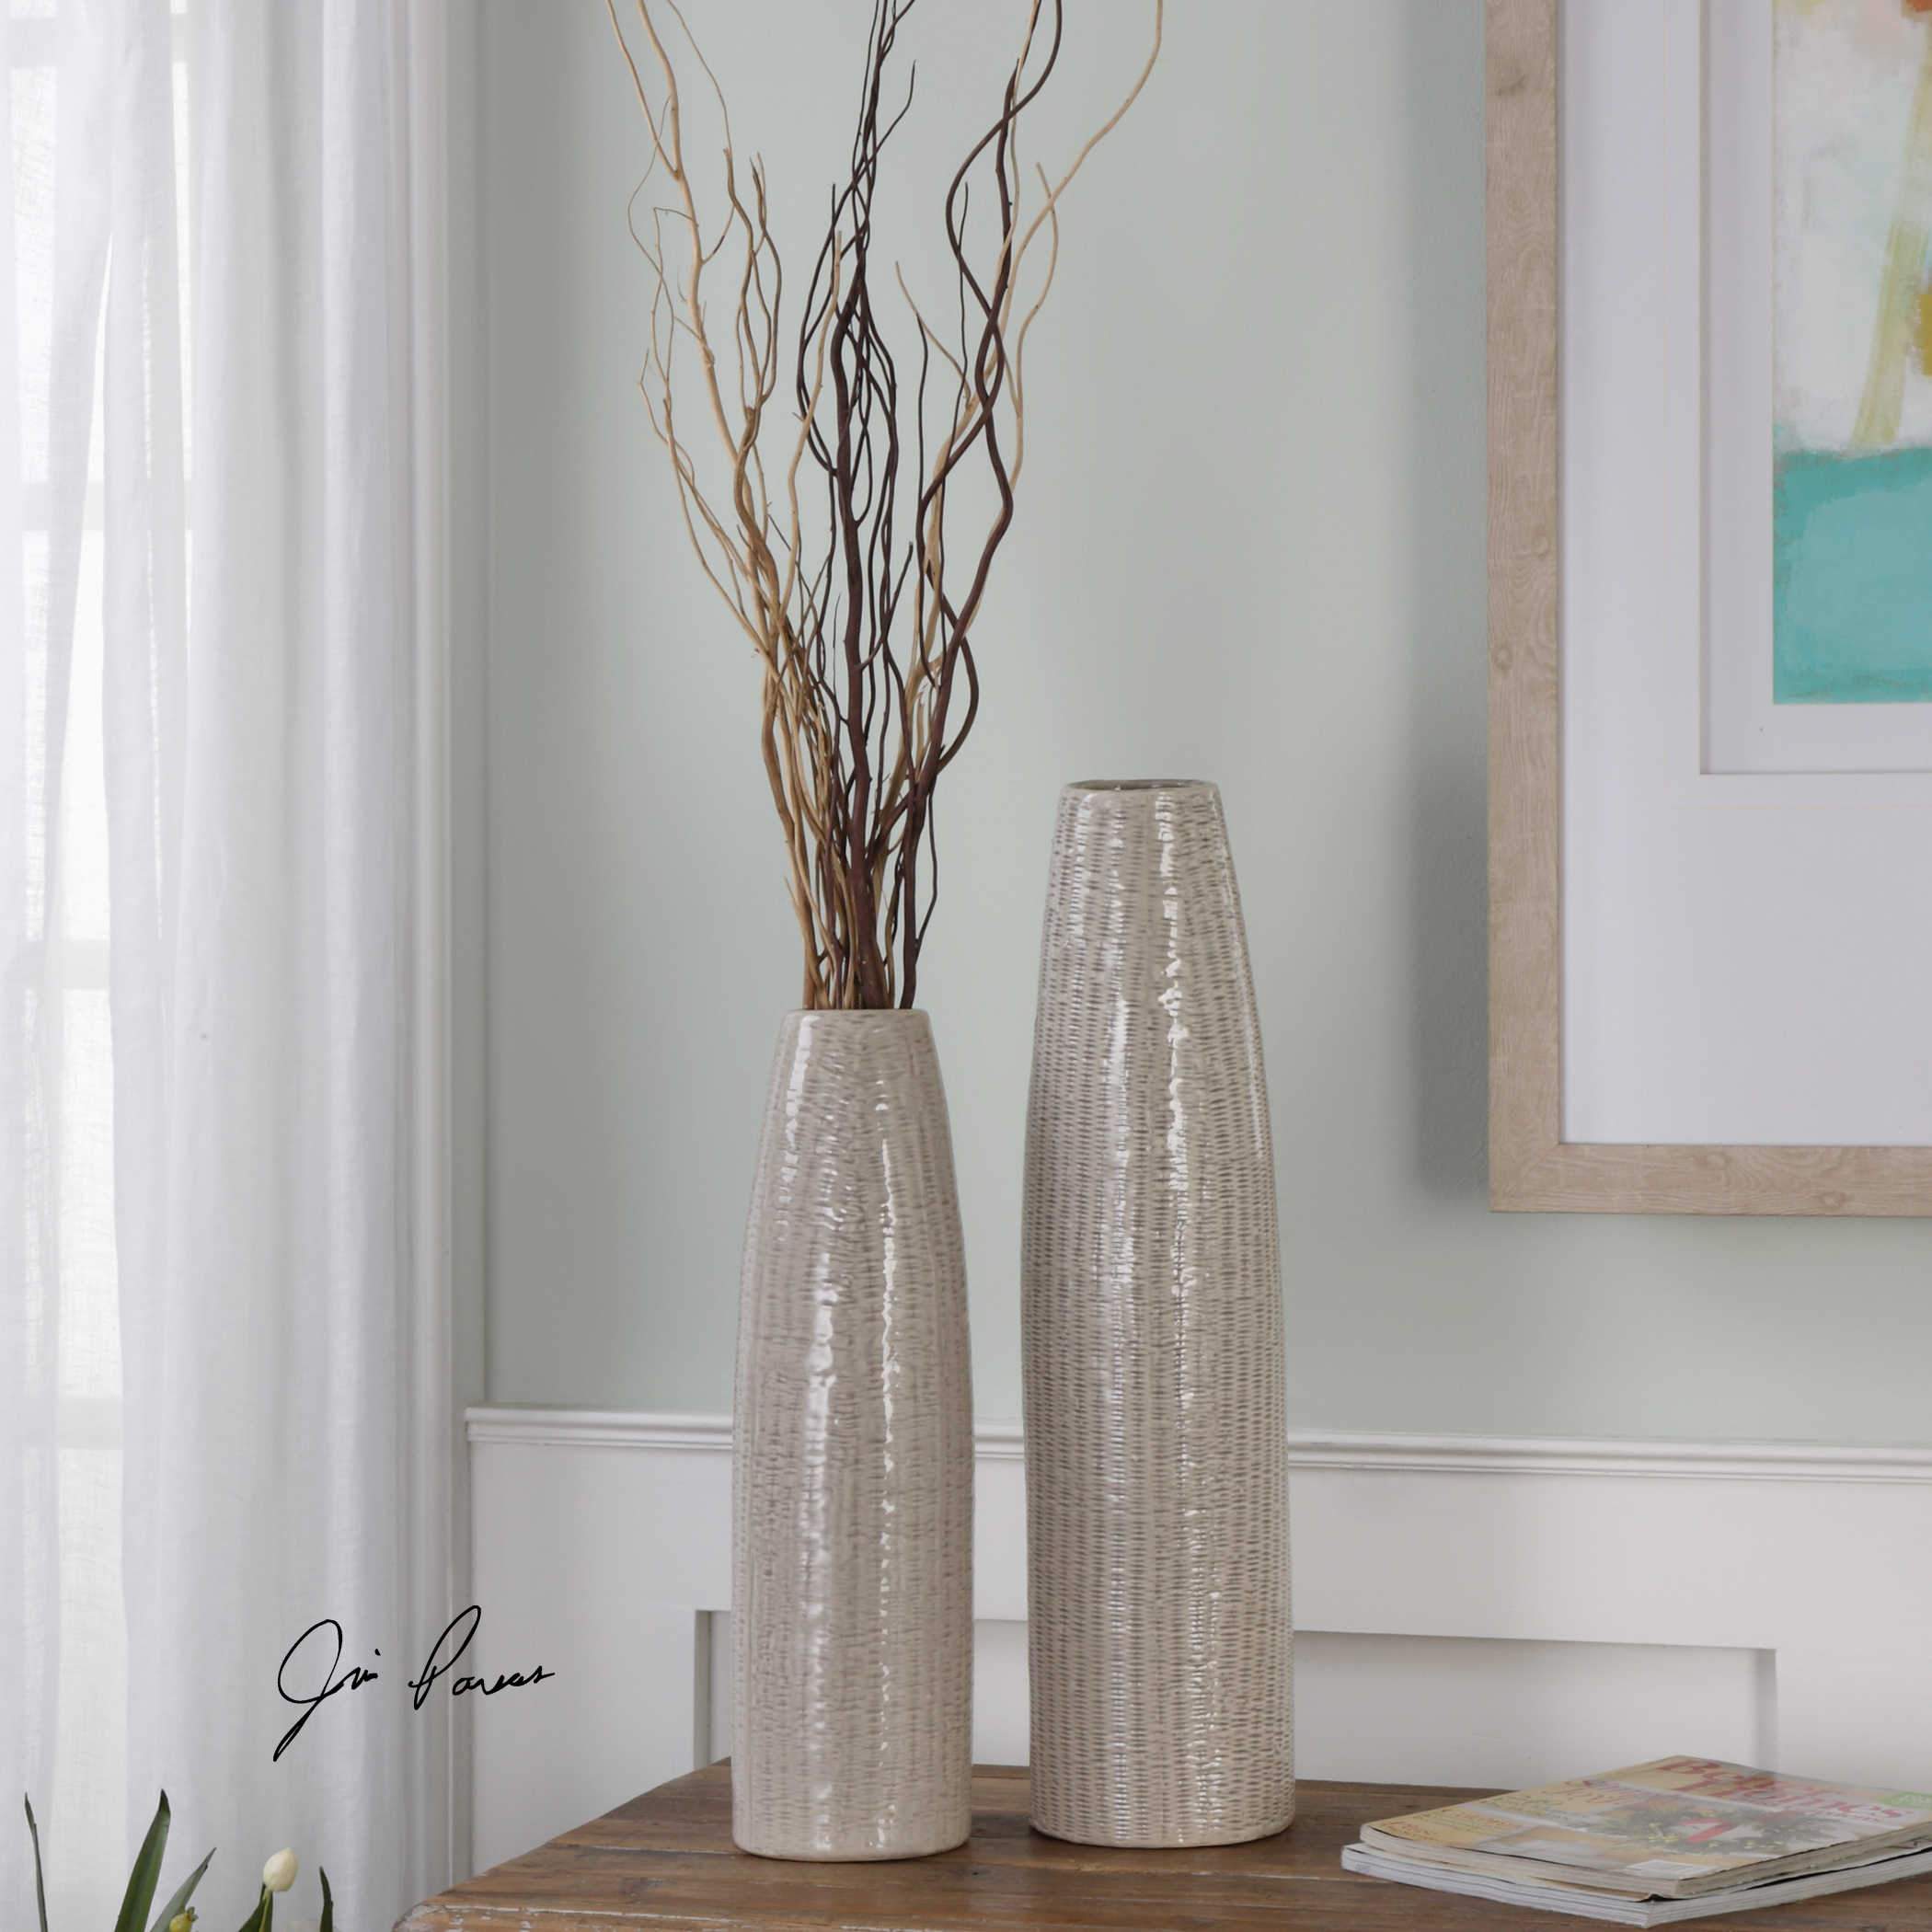 Tall Taupe Sara Vases (S/2) Uttermost